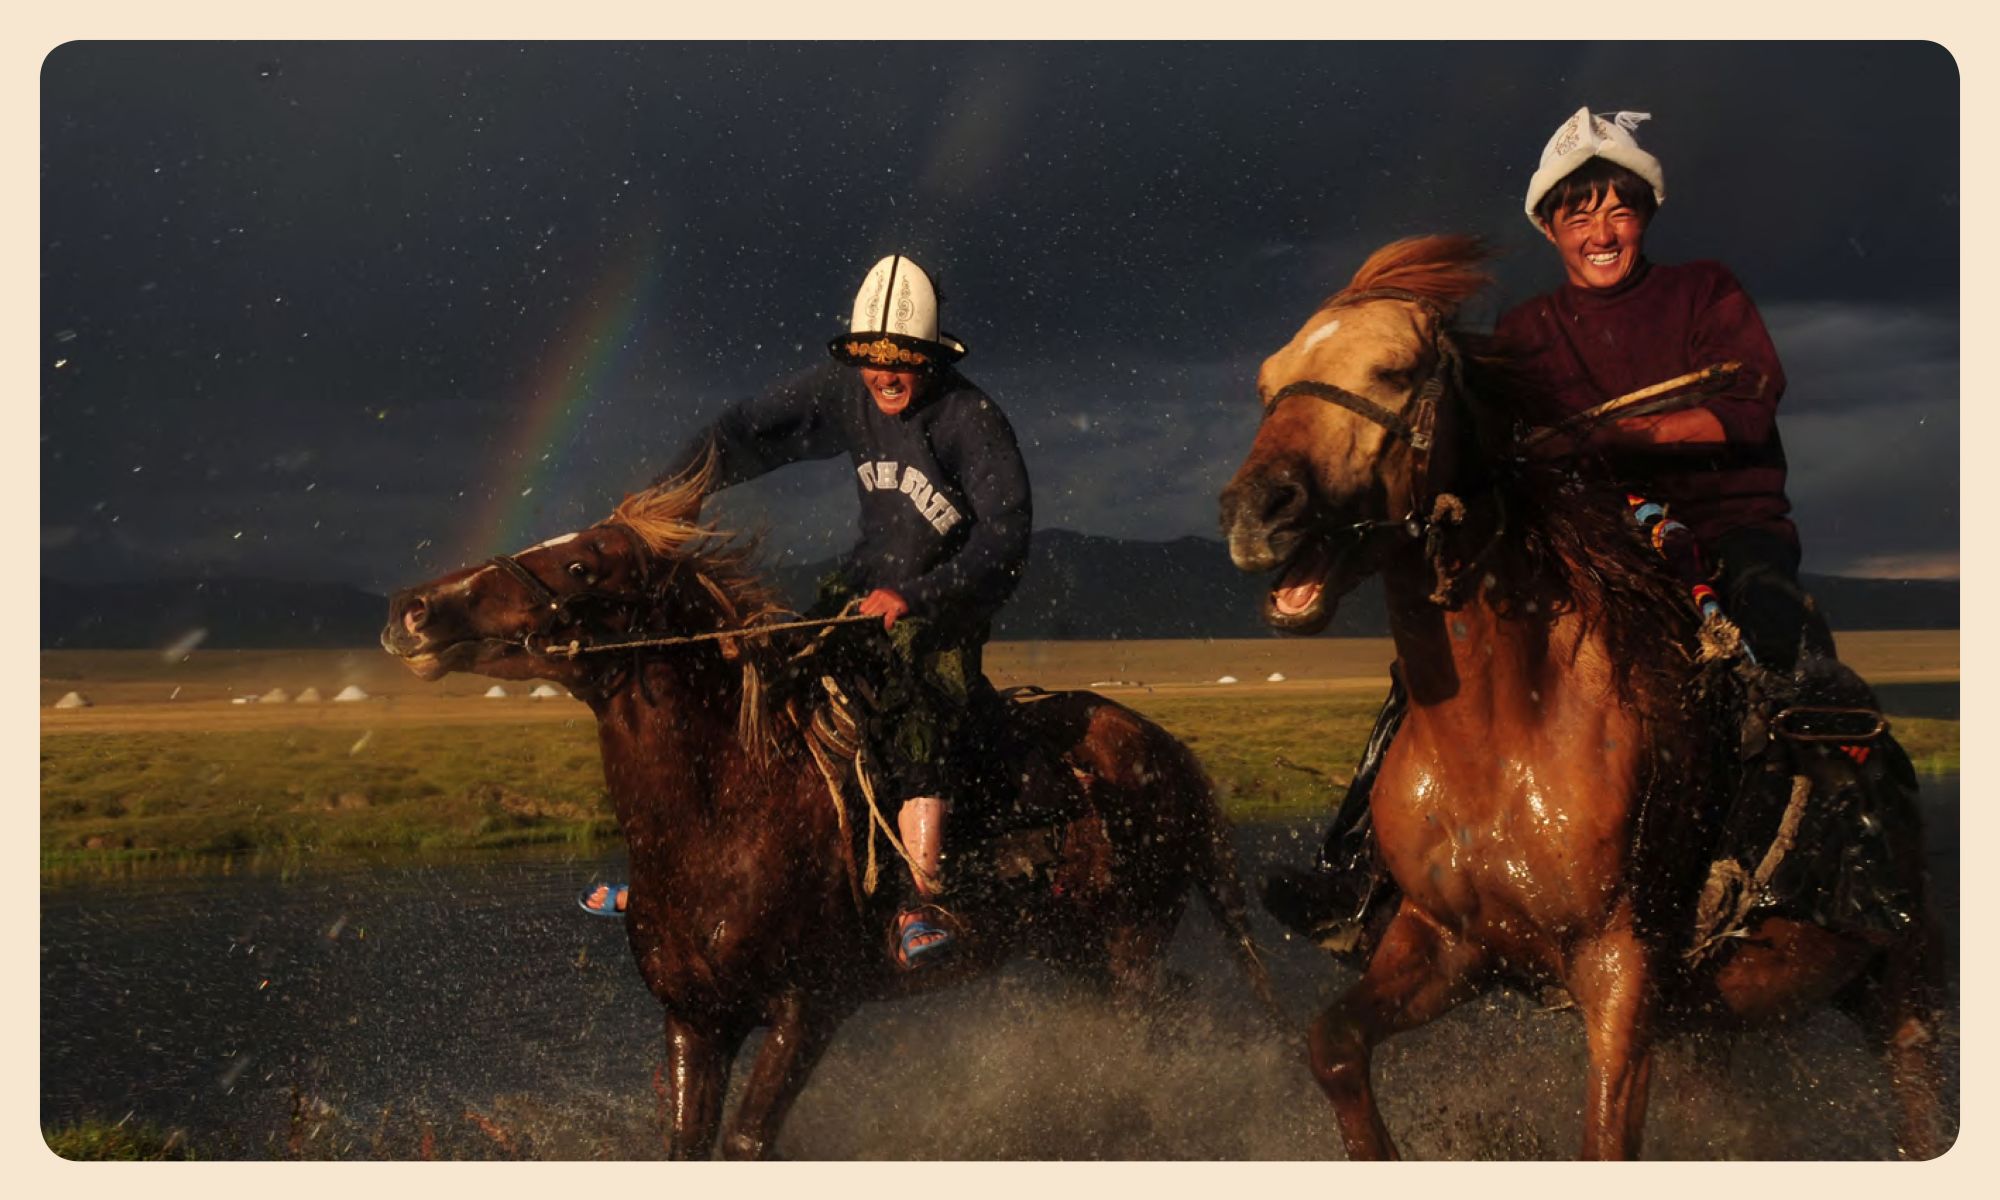 Pages 84-85: The joys of freedom; Galloping through the water under a rainbow